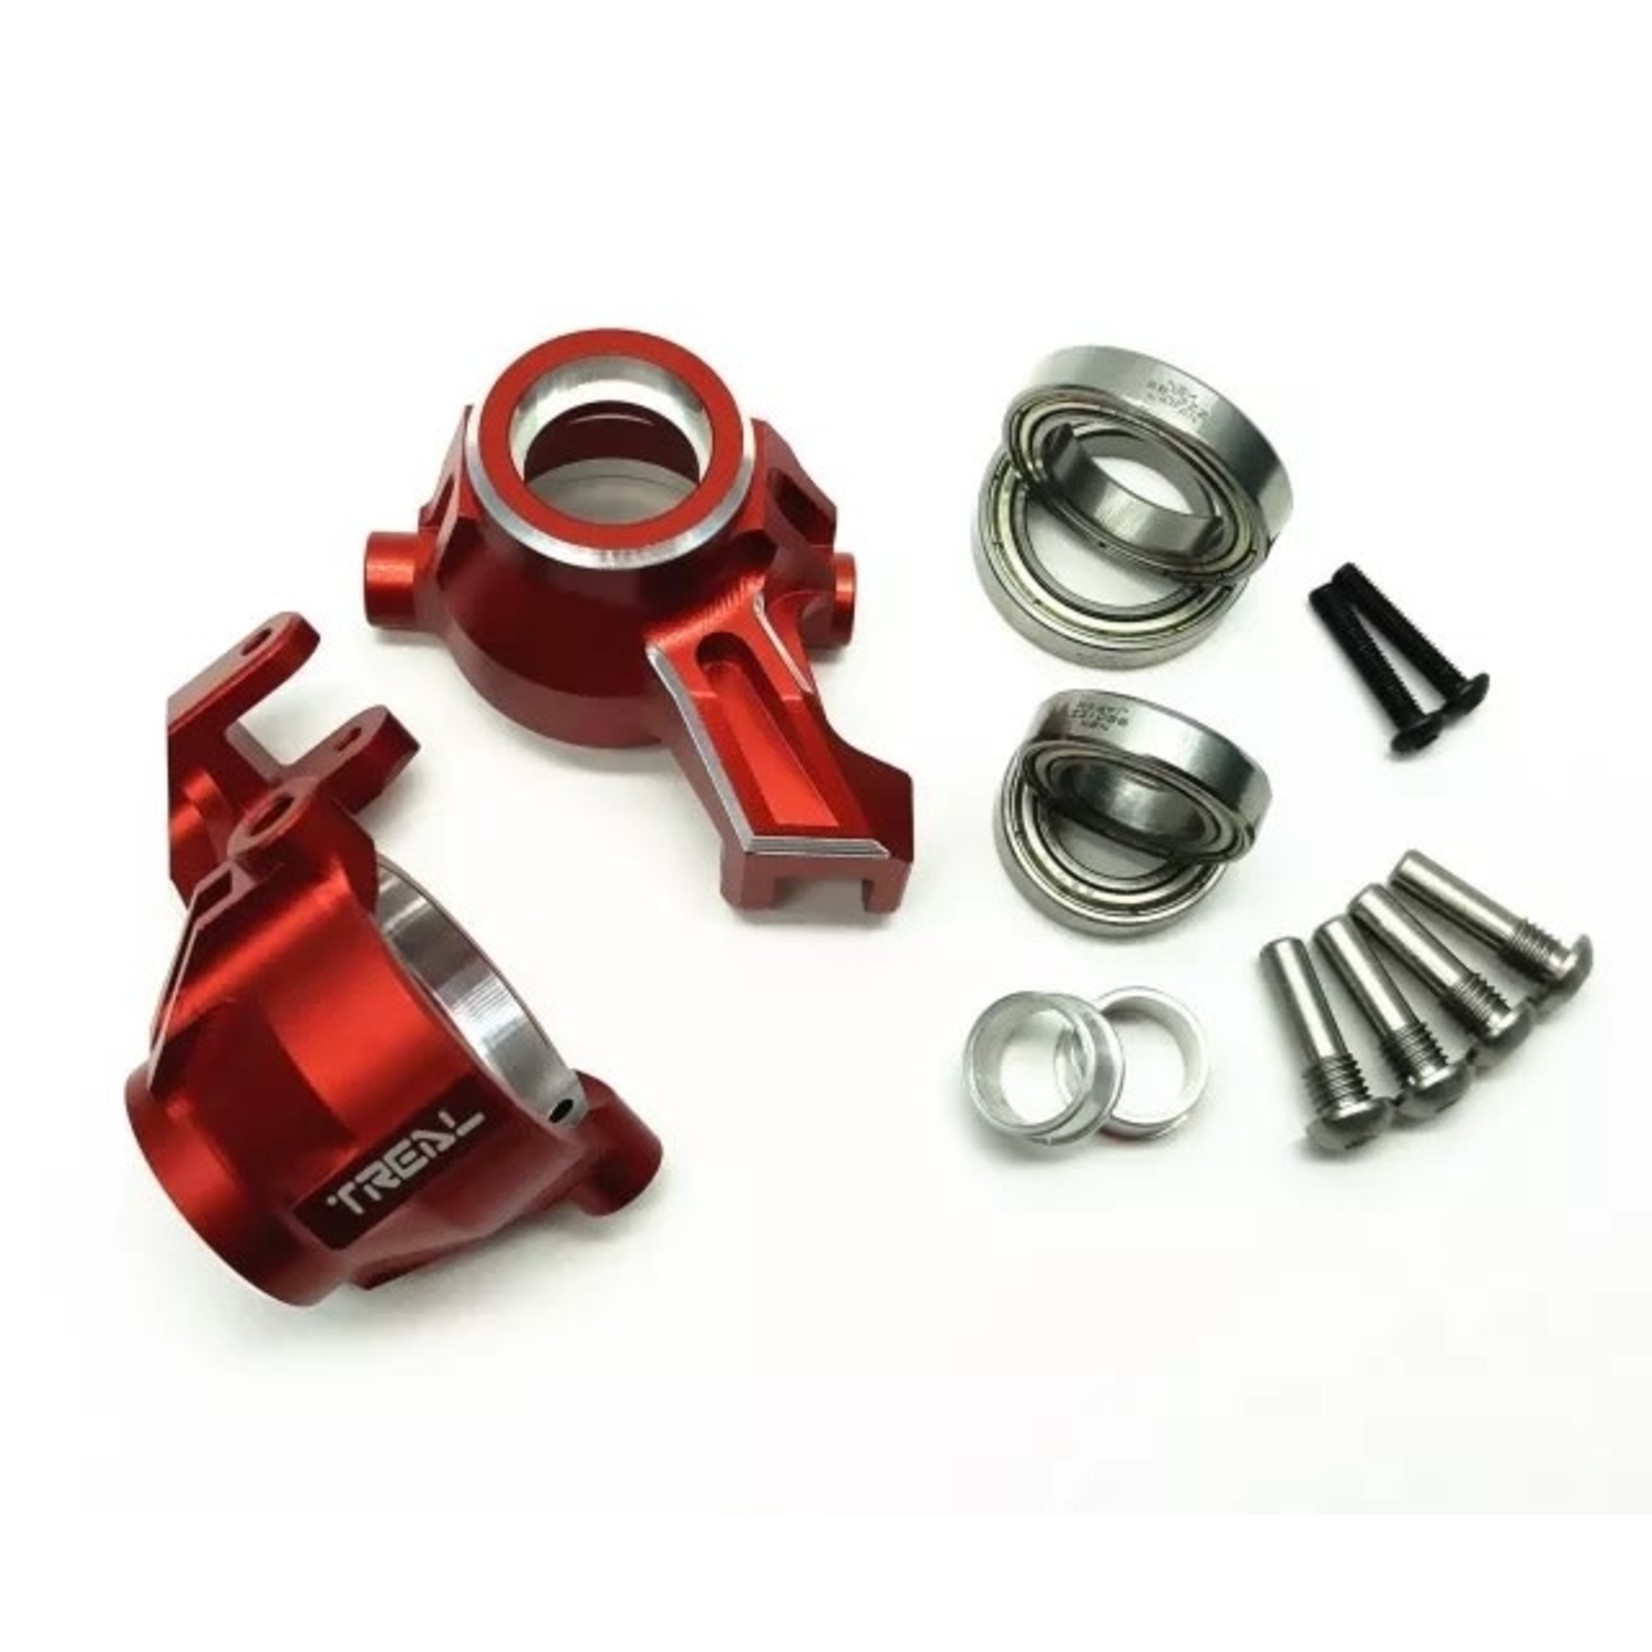 Treal Treal Traxxas Maxx Front Knuckles Arms Set (Red) #X002OD7SQ1